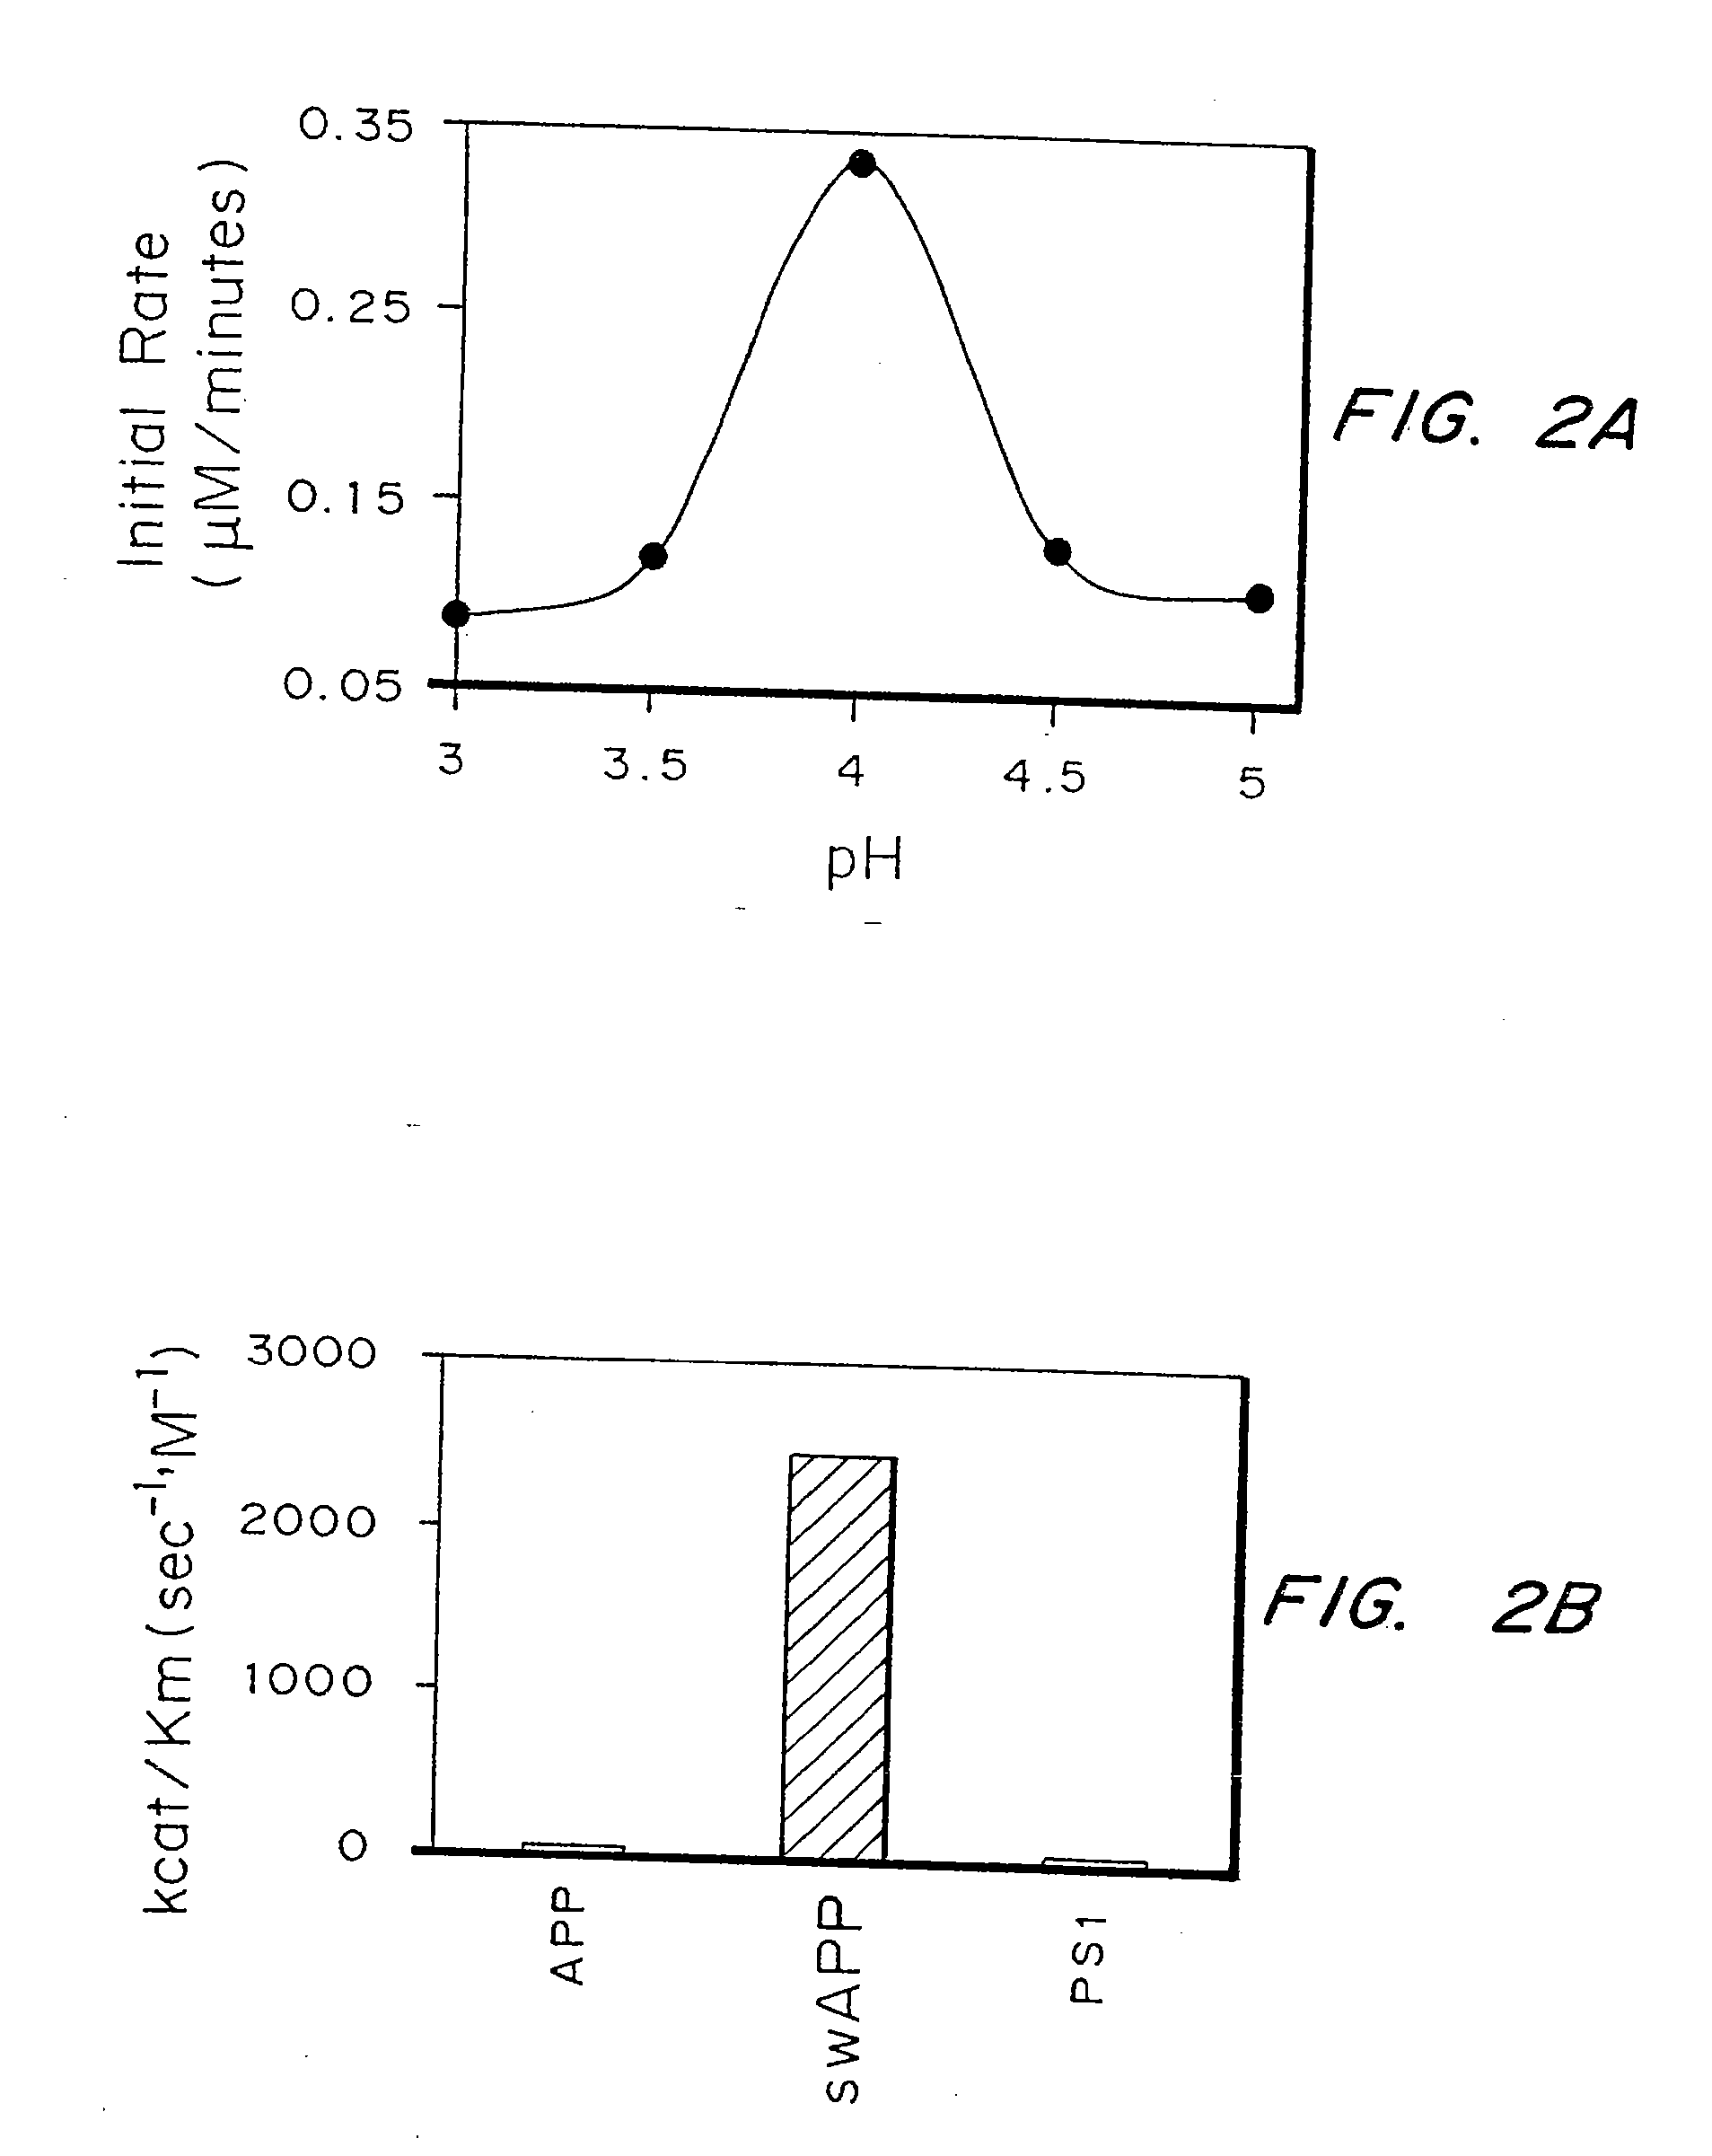 Inhibitors of memapsin 2 and use thereof